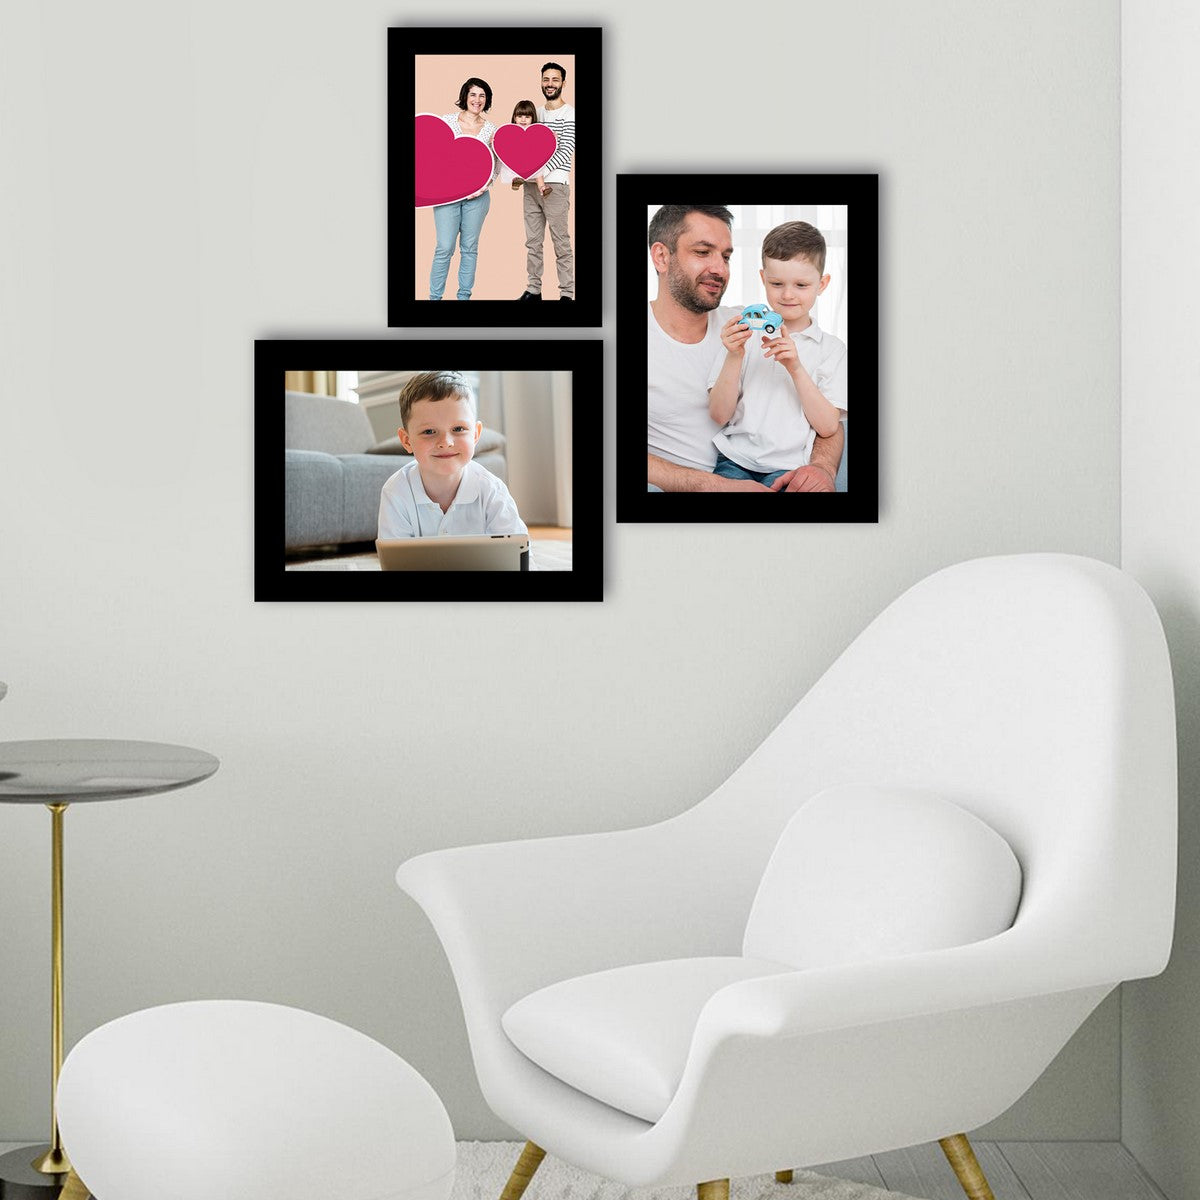 Memory Wall Collage Photo Frame - Set of 3 Photo Frames for 1 Photo of 5"x7" and 2 Photos of 6"x8" 2